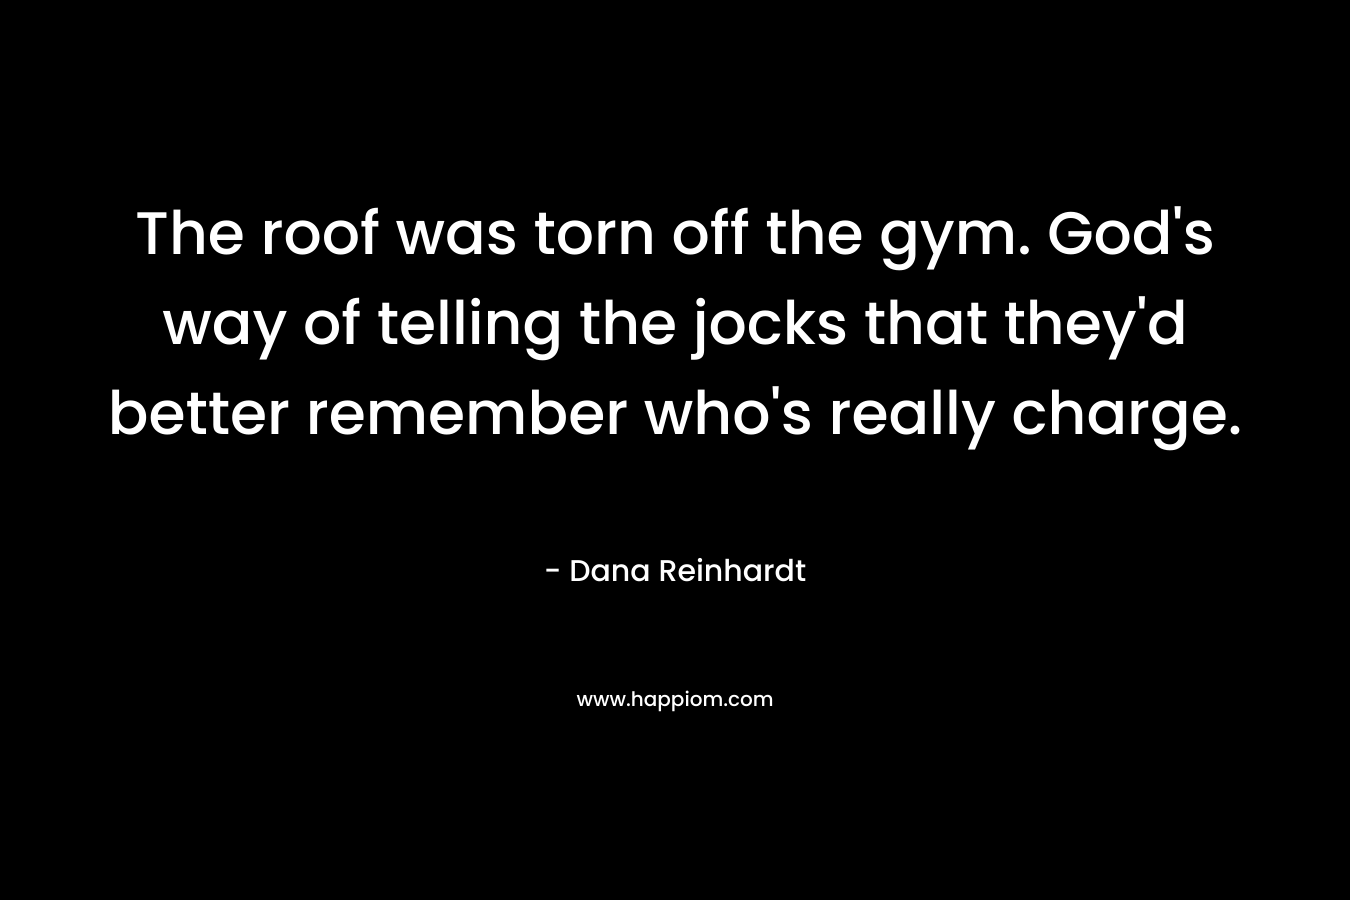 The roof was torn off the gym. God’s way of telling the jocks that they’d better remember who’s really charge. – Dana Reinhardt